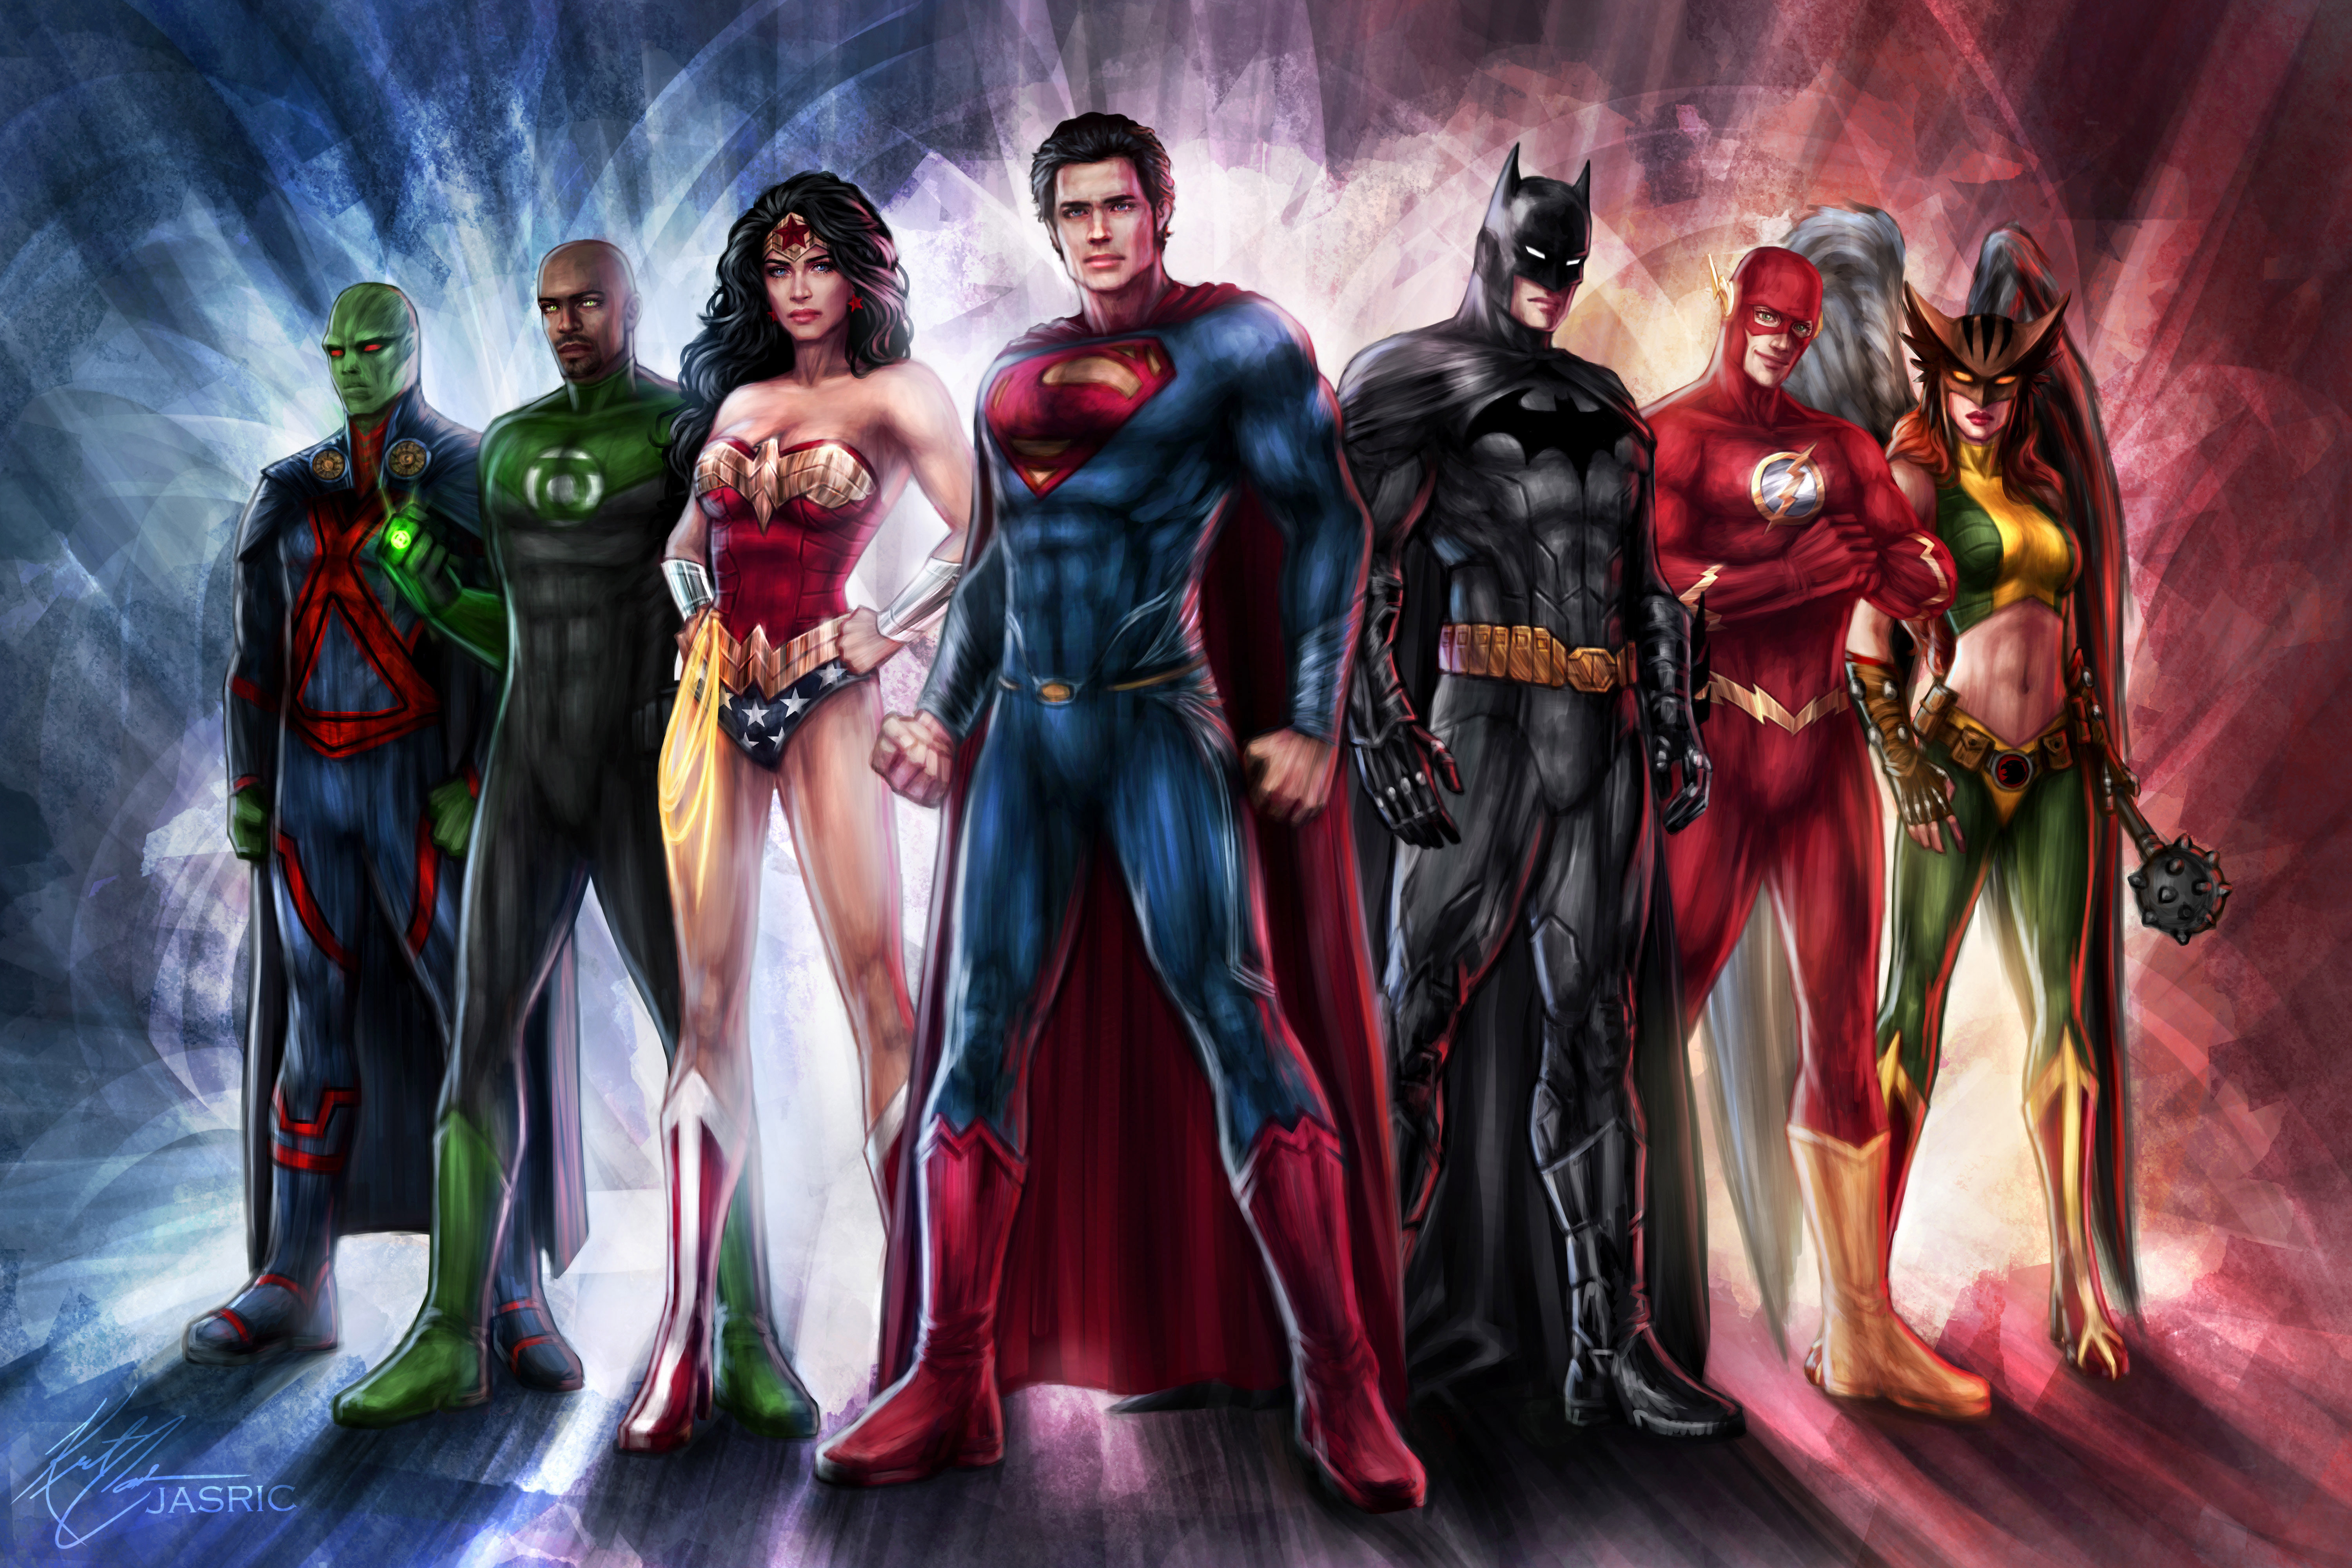 Animated Justice League Wallpaper 4k - 6000x4000 Wallpaper 